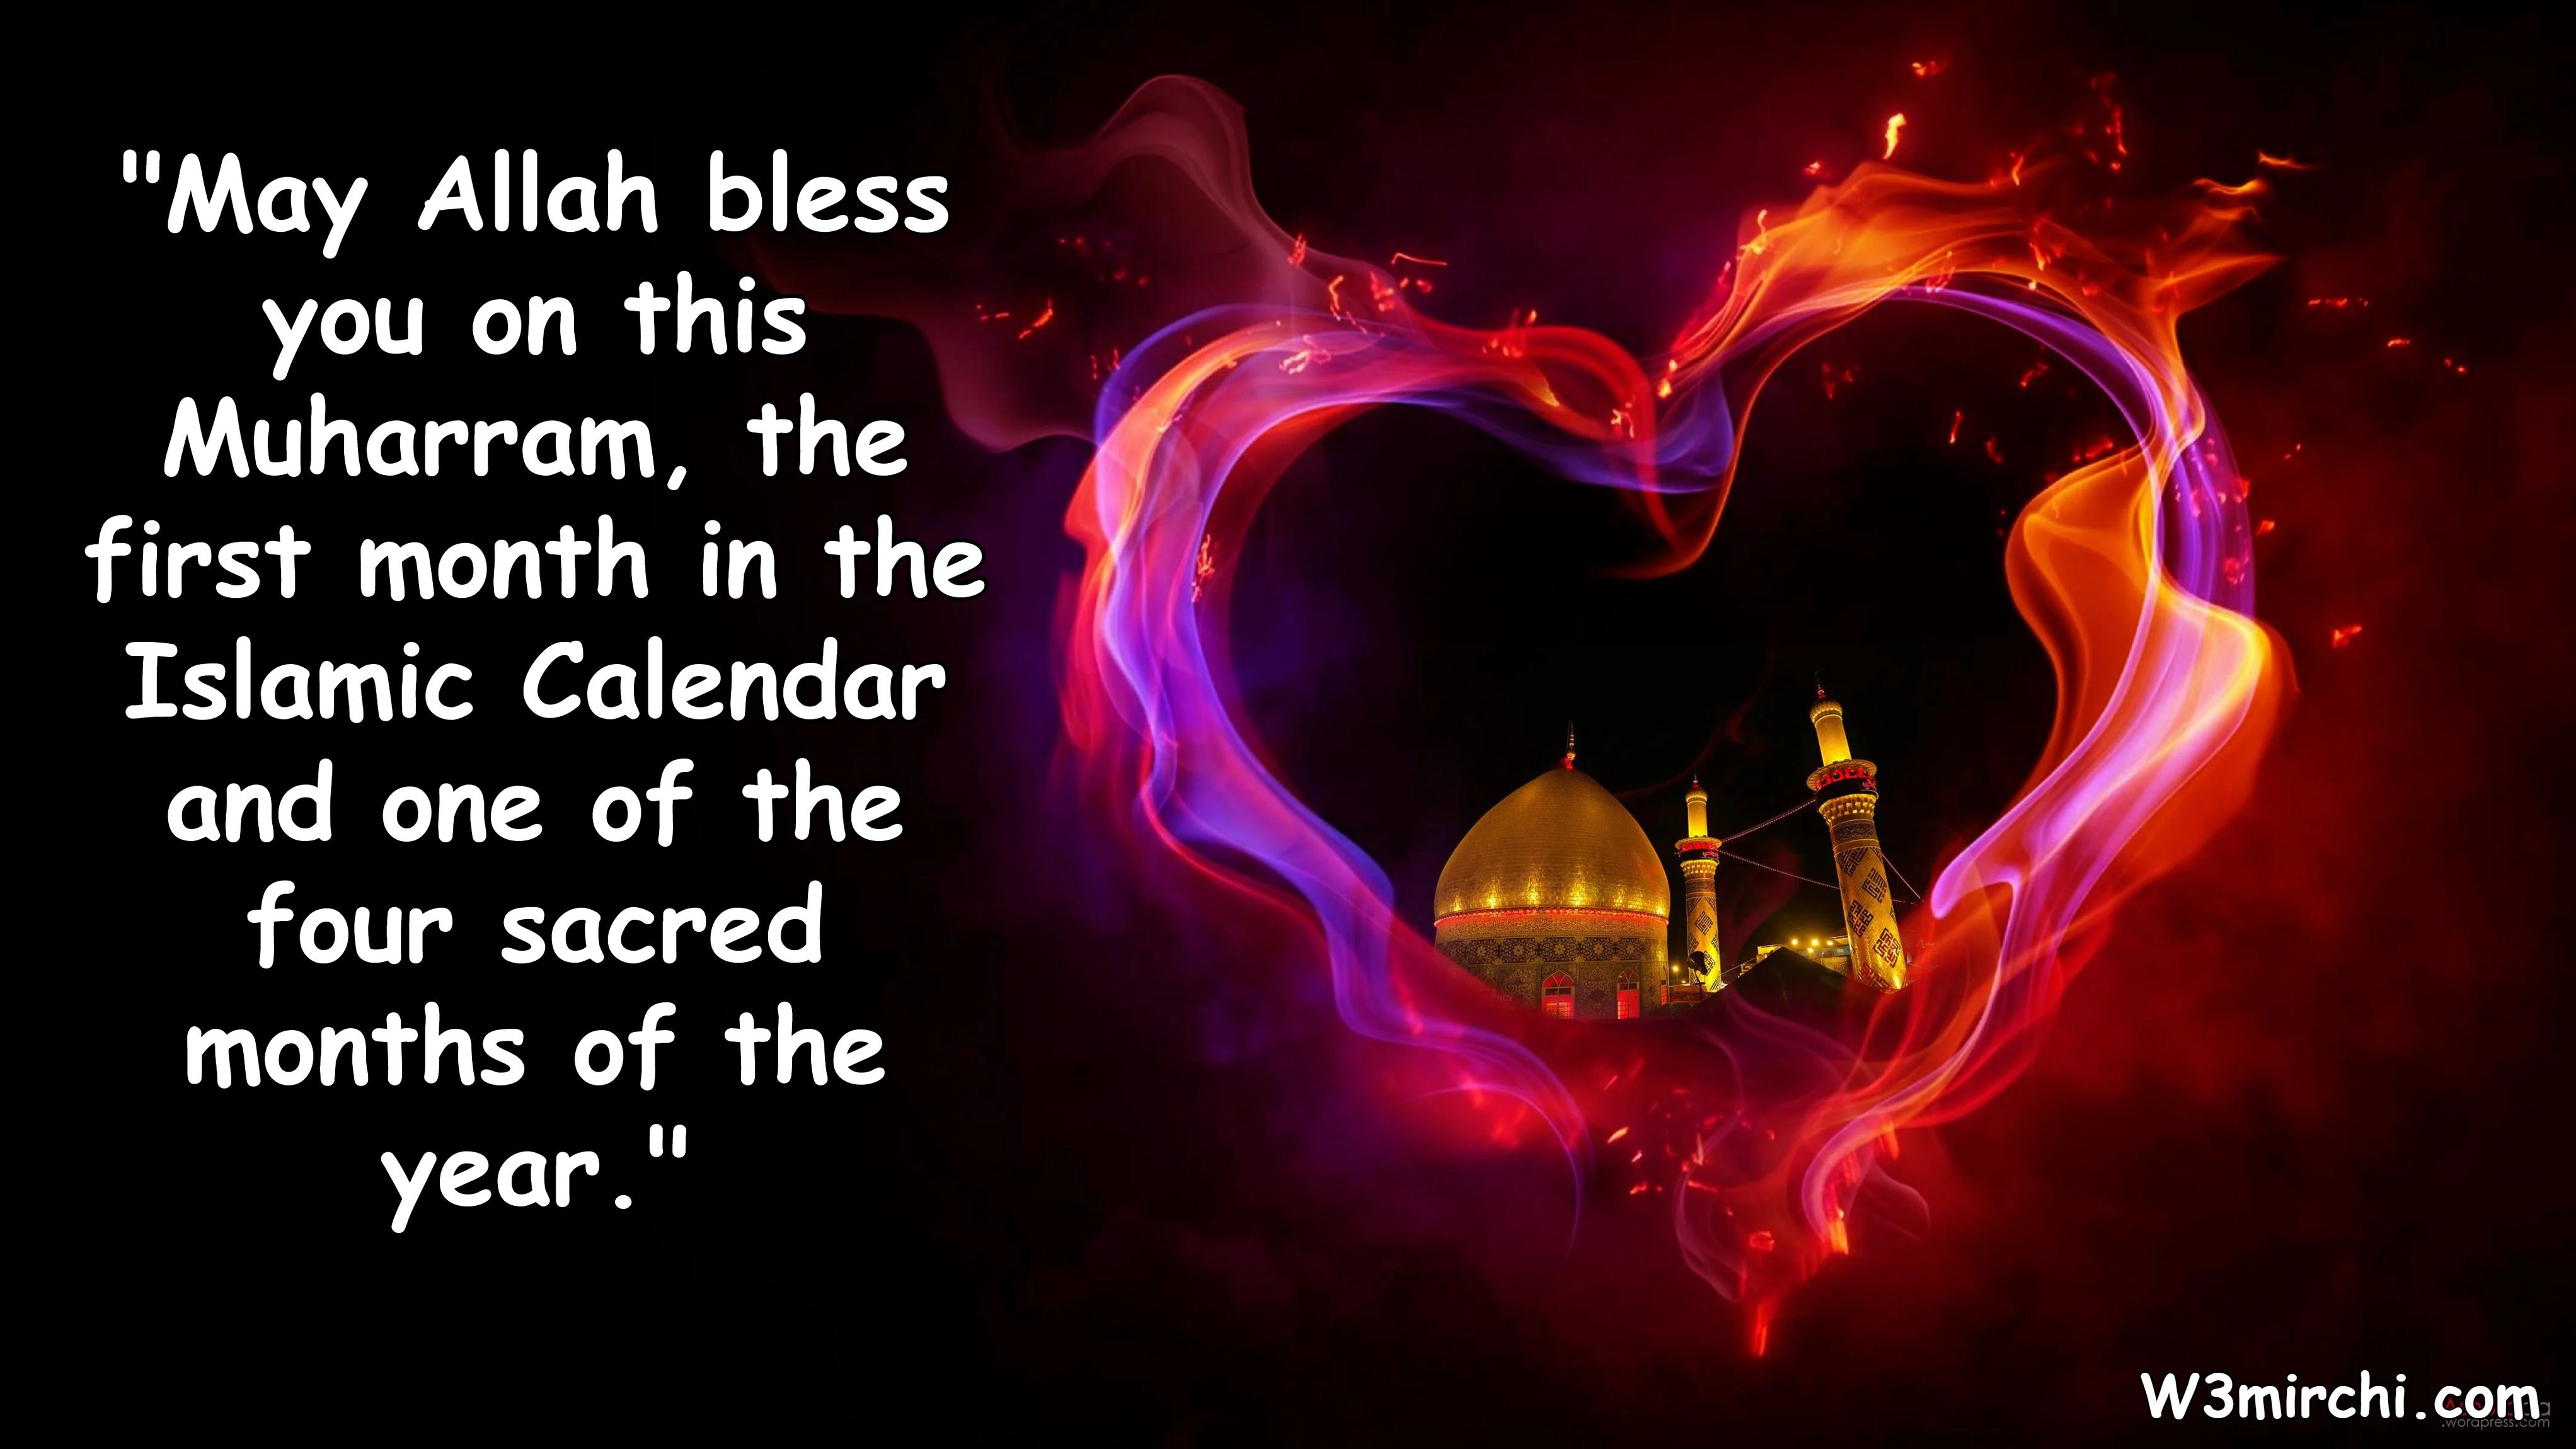 "May Allah bless you on this Muharram,